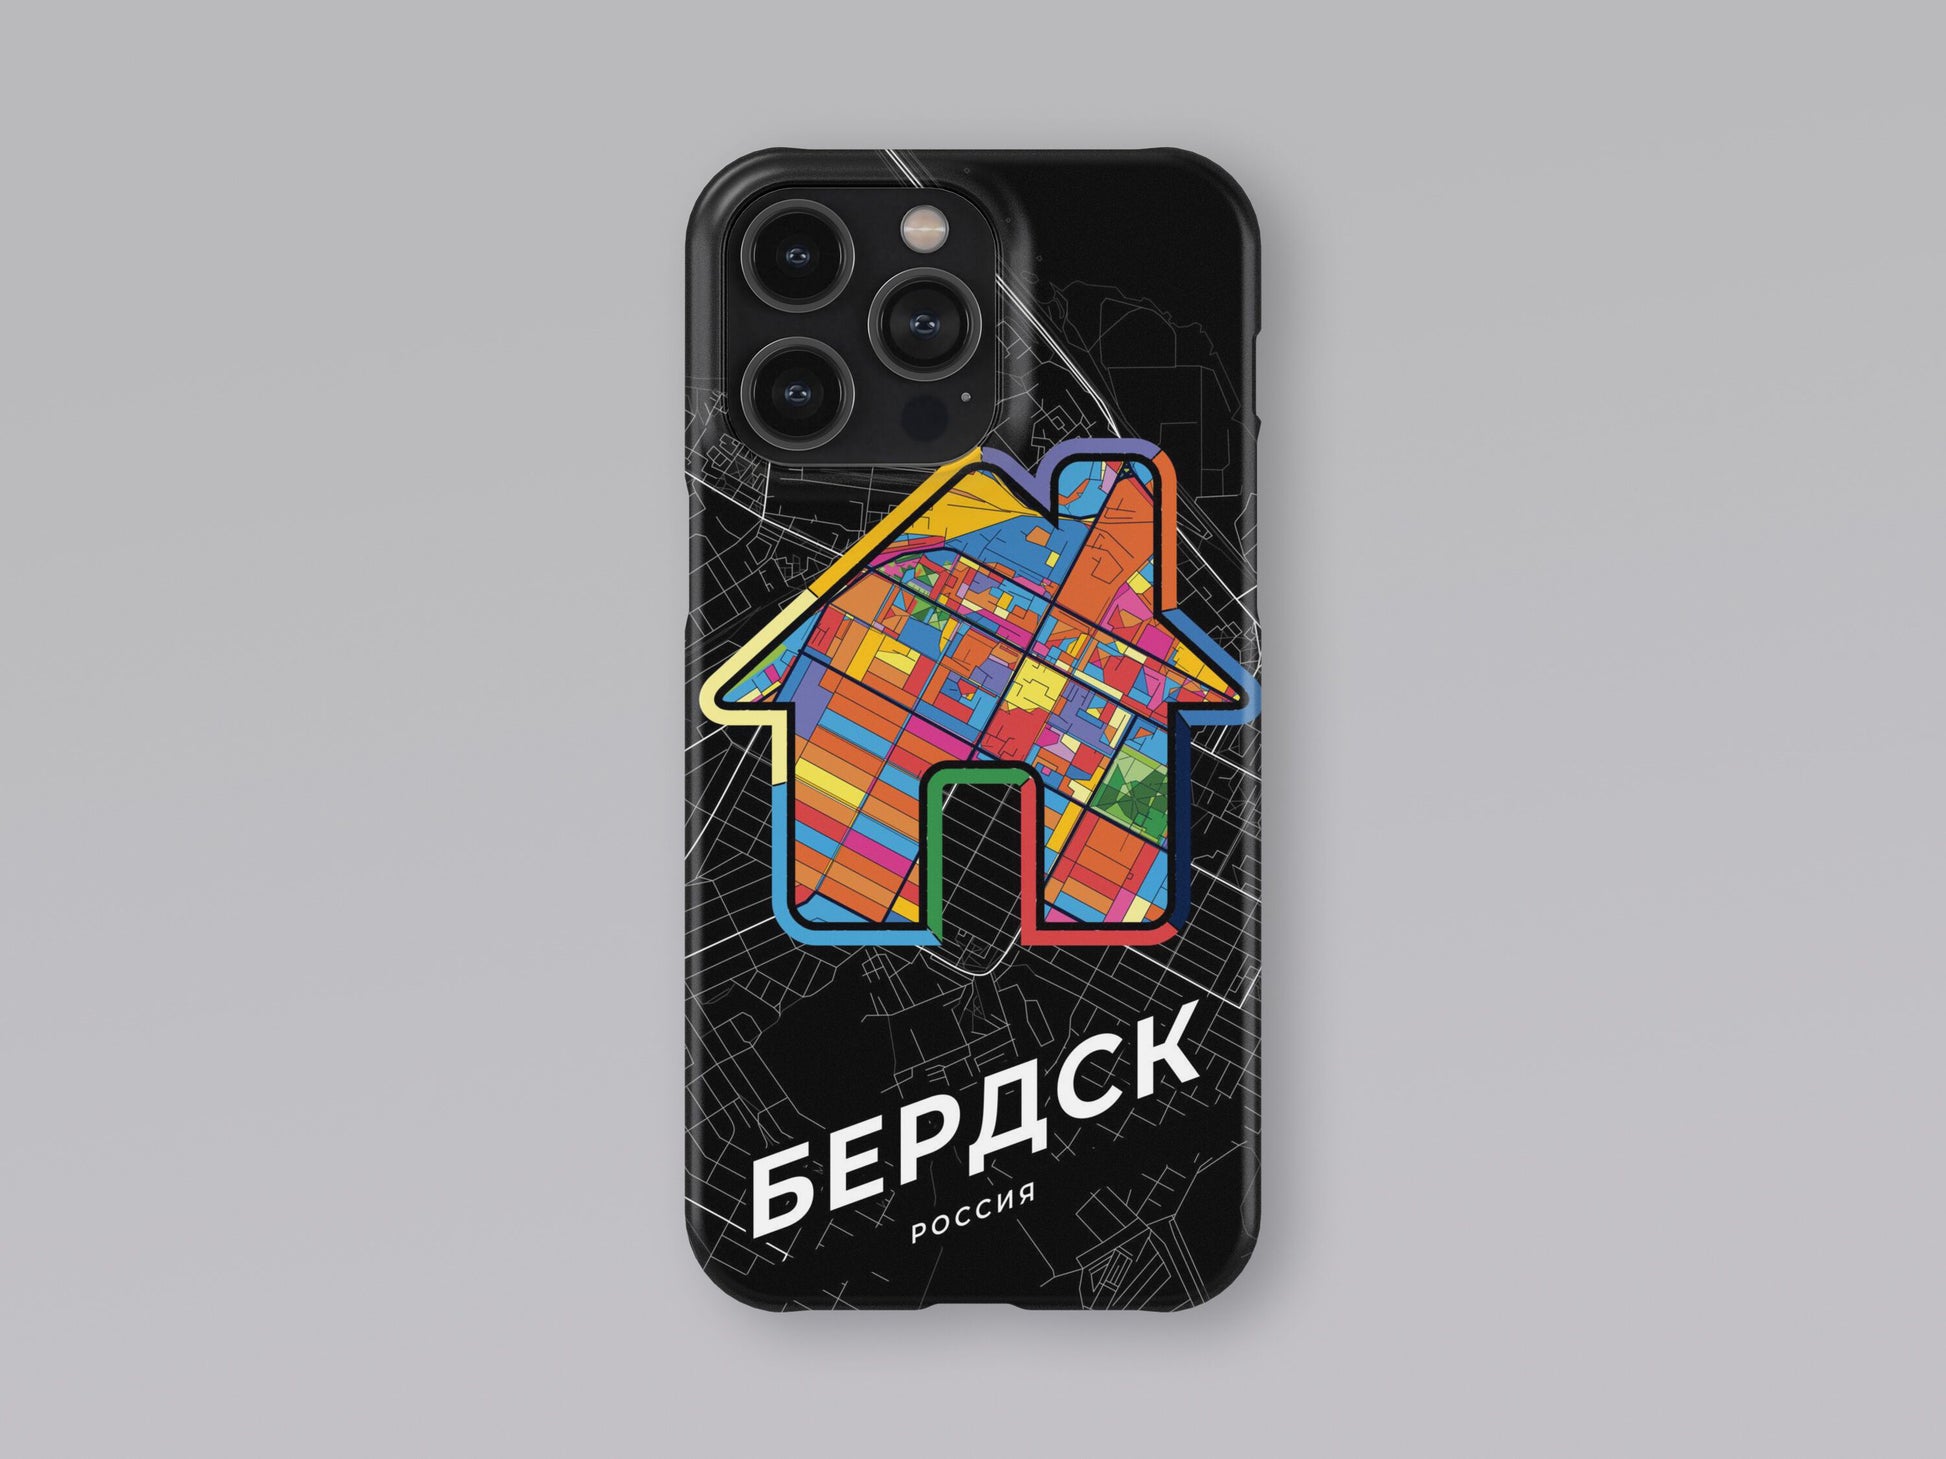 Berdsk Russia slim phone case with colorful icon. Birthday, wedding or housewarming gift. Couple match cases. 3